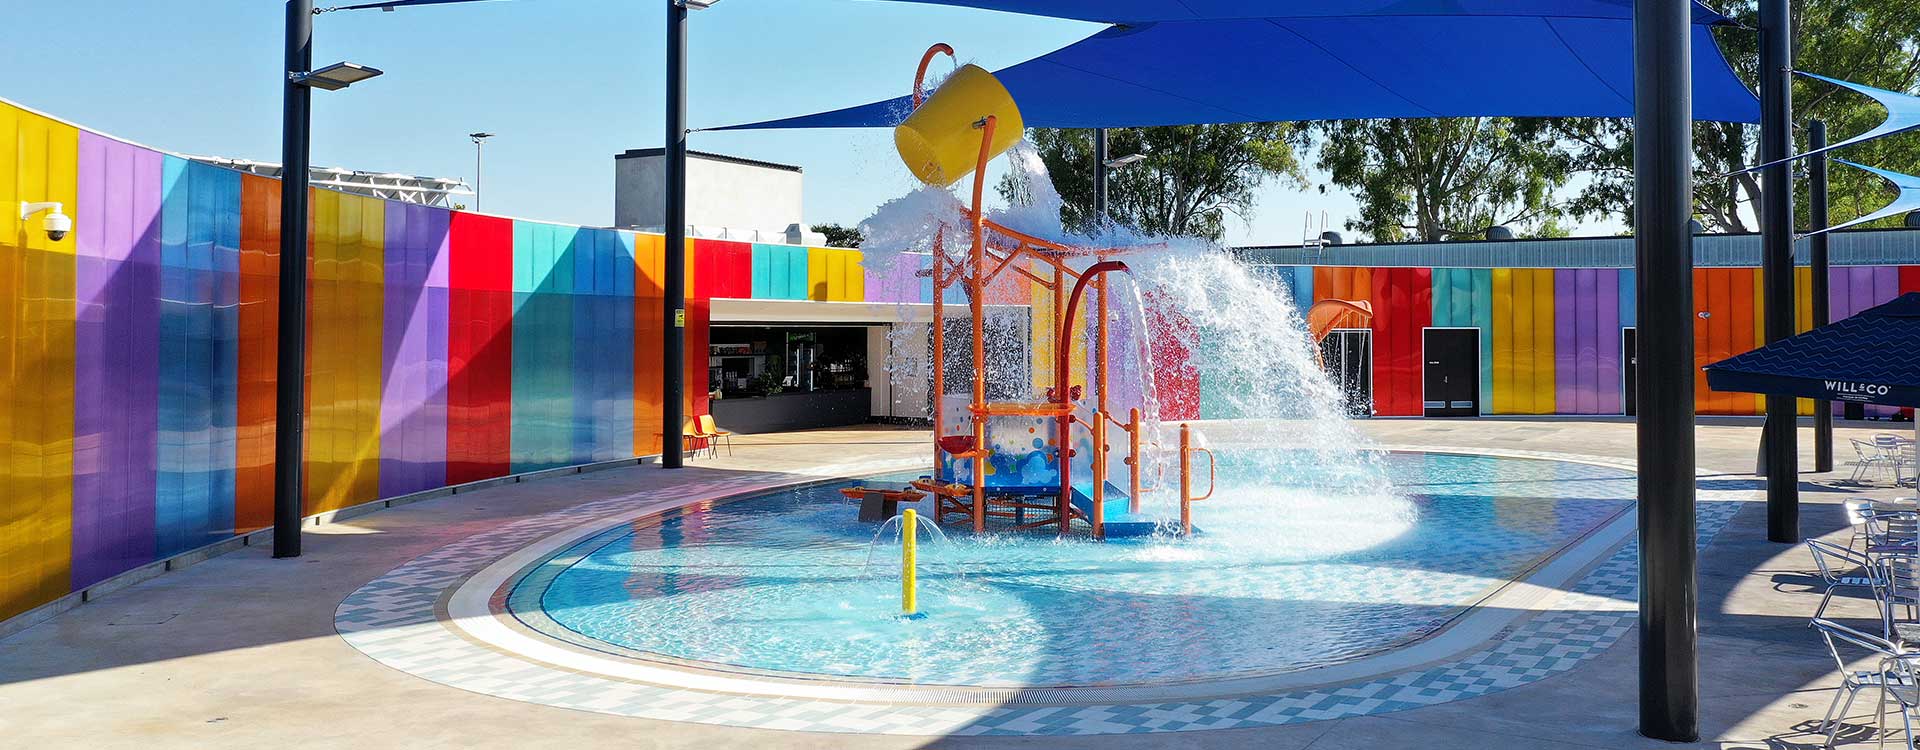 Gunnedah Memorial Pool | Hines Constructions, Central West NSW